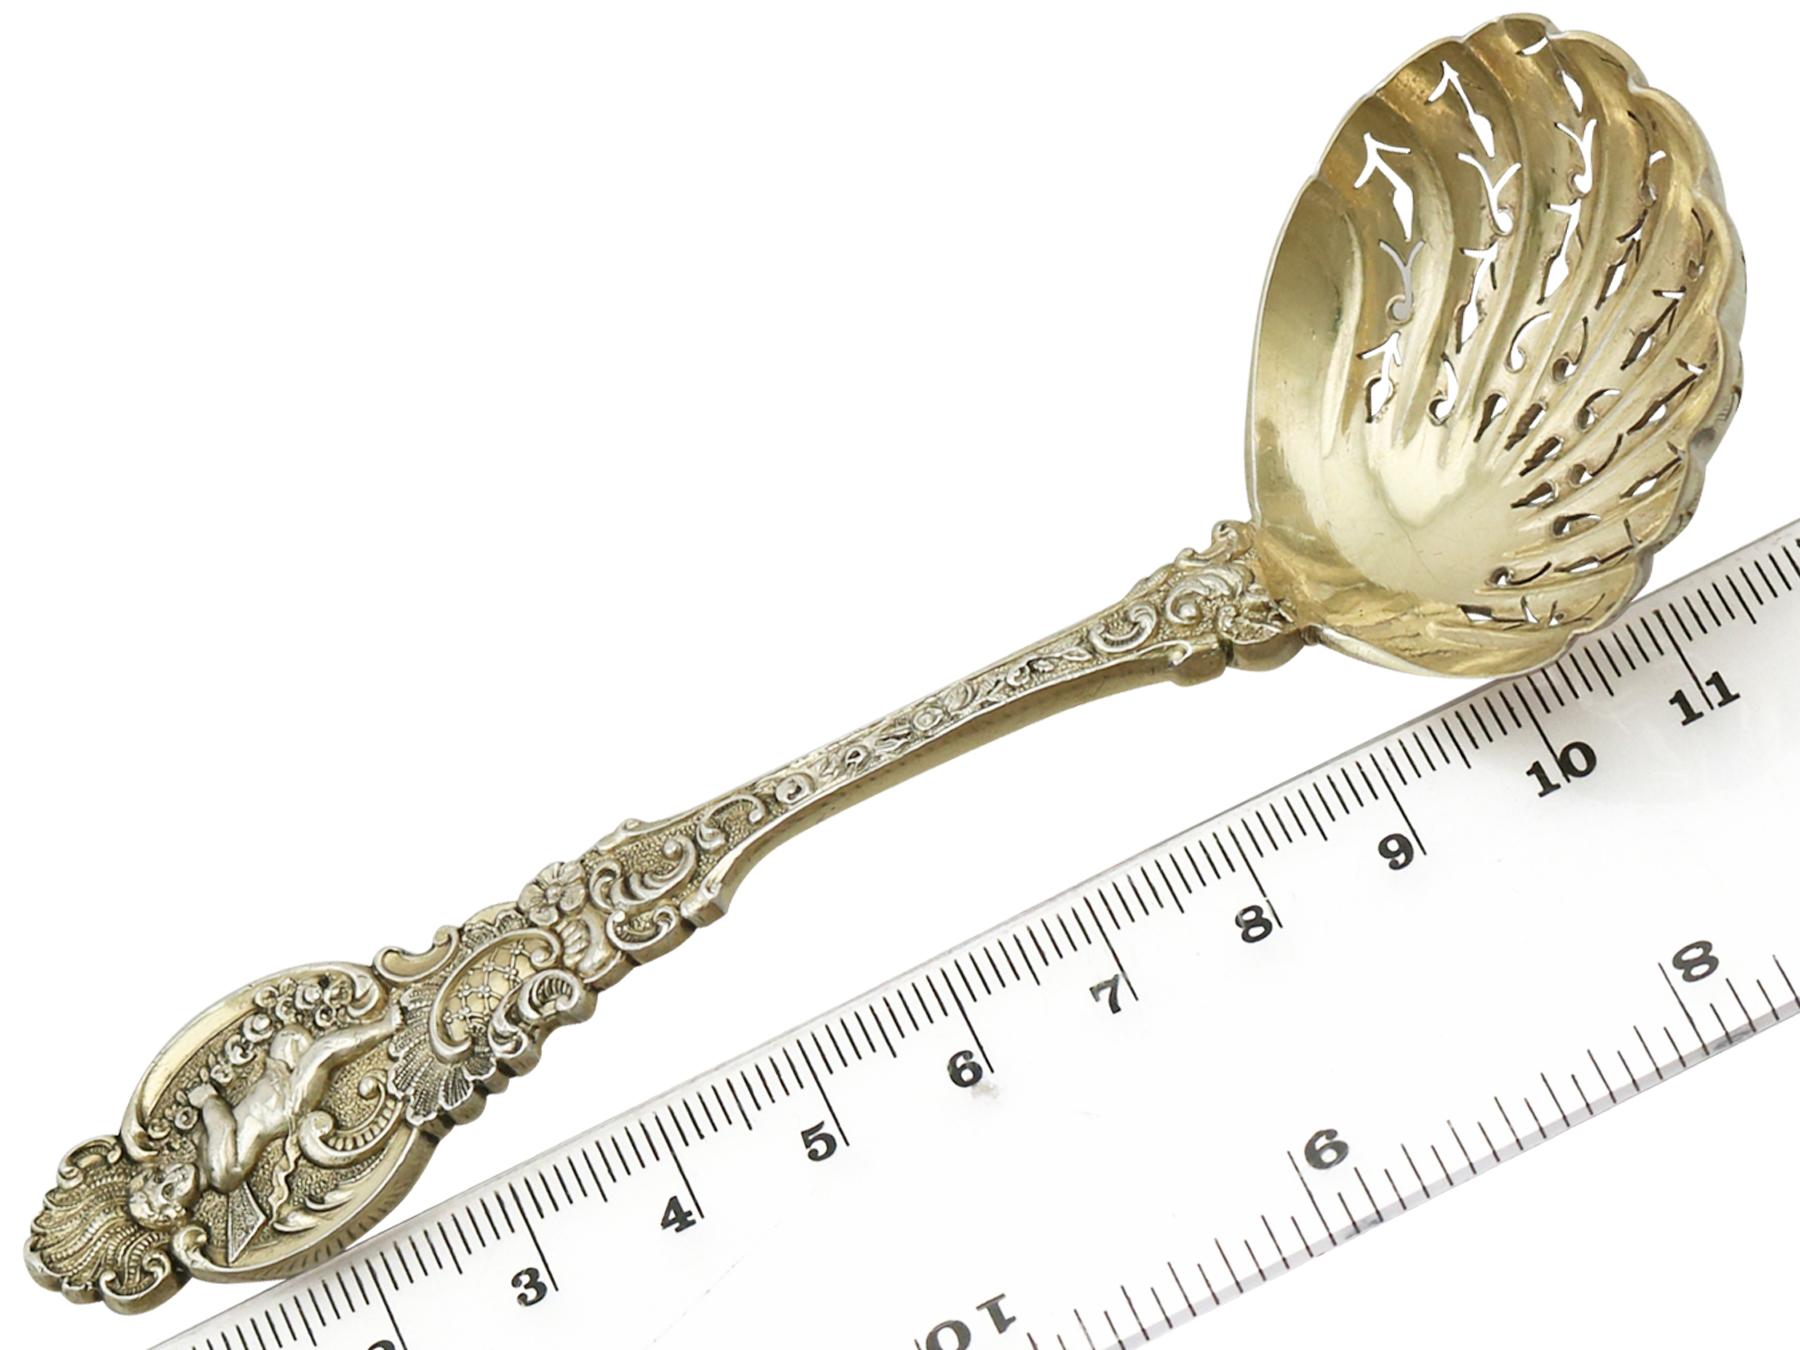 1890s Victorian Sterling Silver Gilt Sugar Sifter Spoon and Bowl For Sale 5